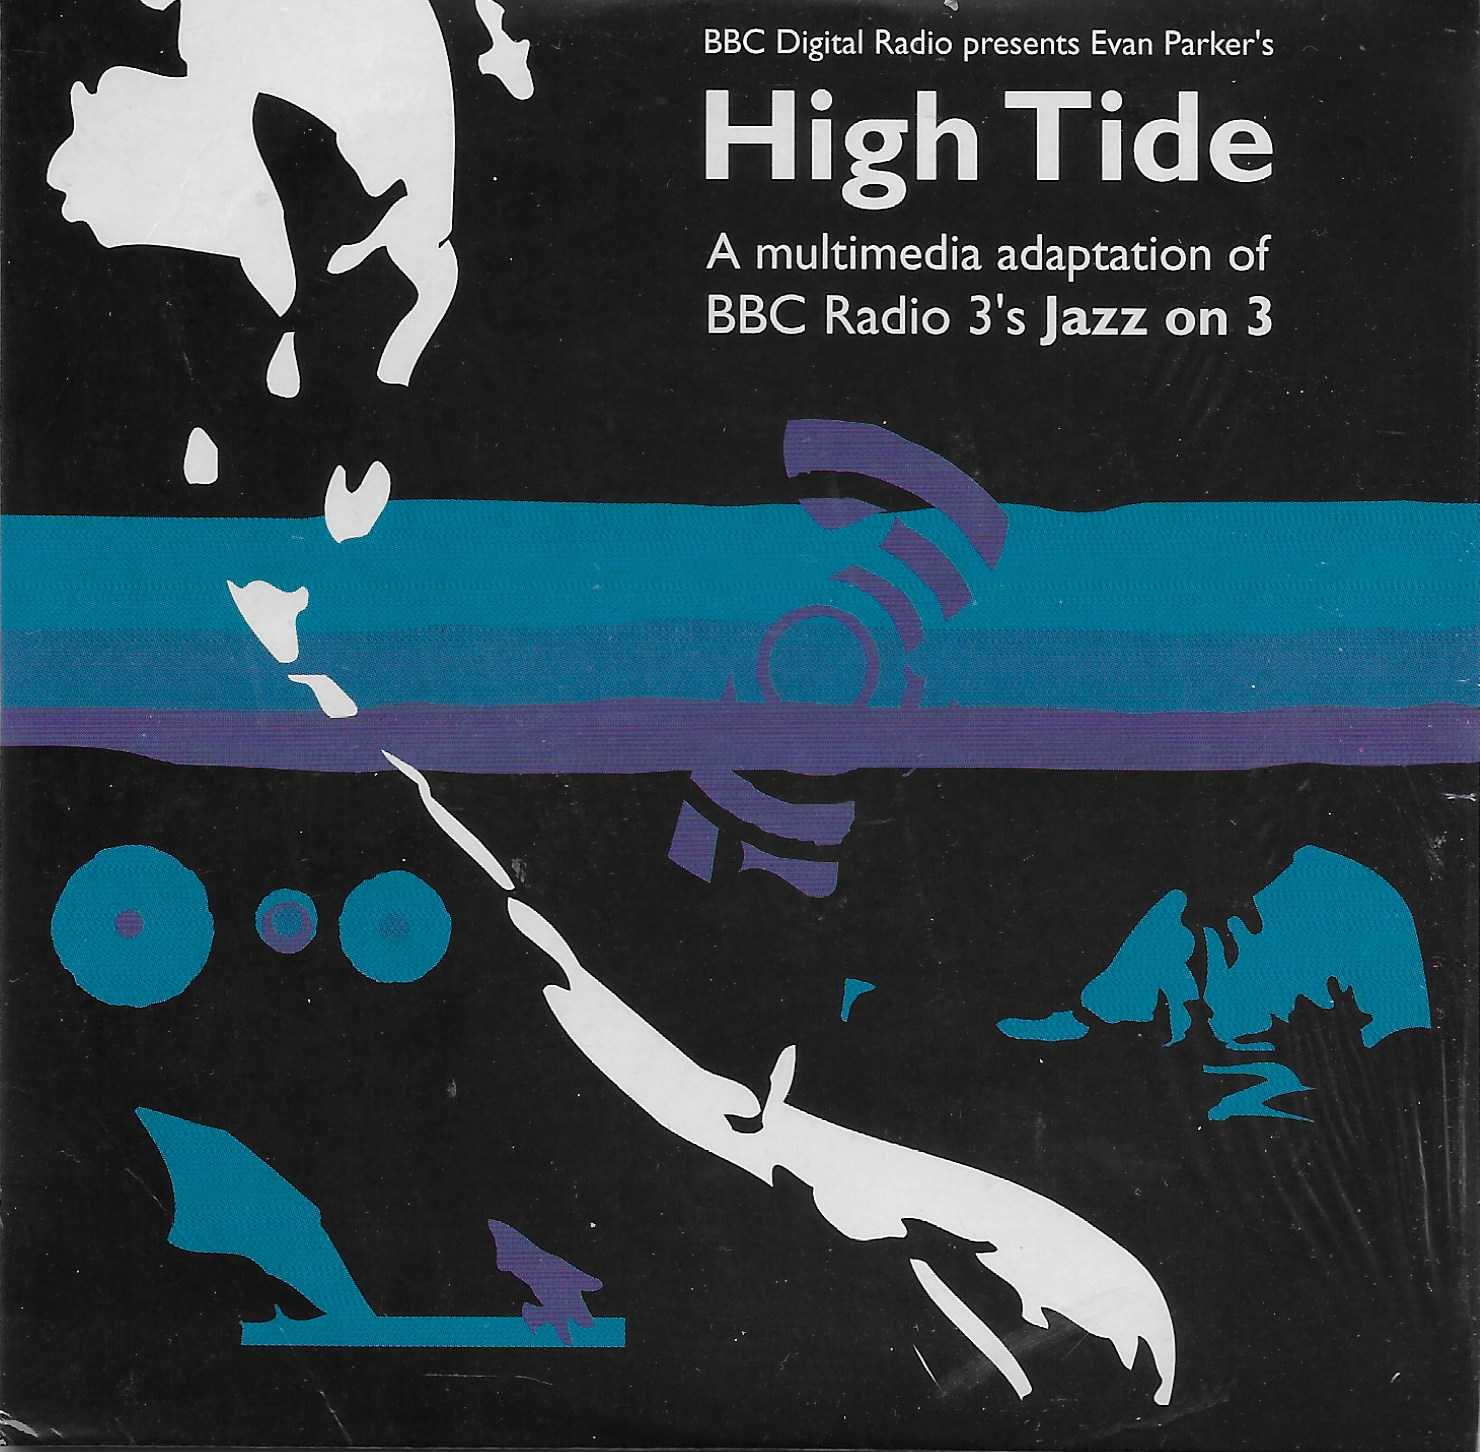 Picture of BBC DR 1 High tide by artist Evan Parker from the BBC cds - Records and Tapes library